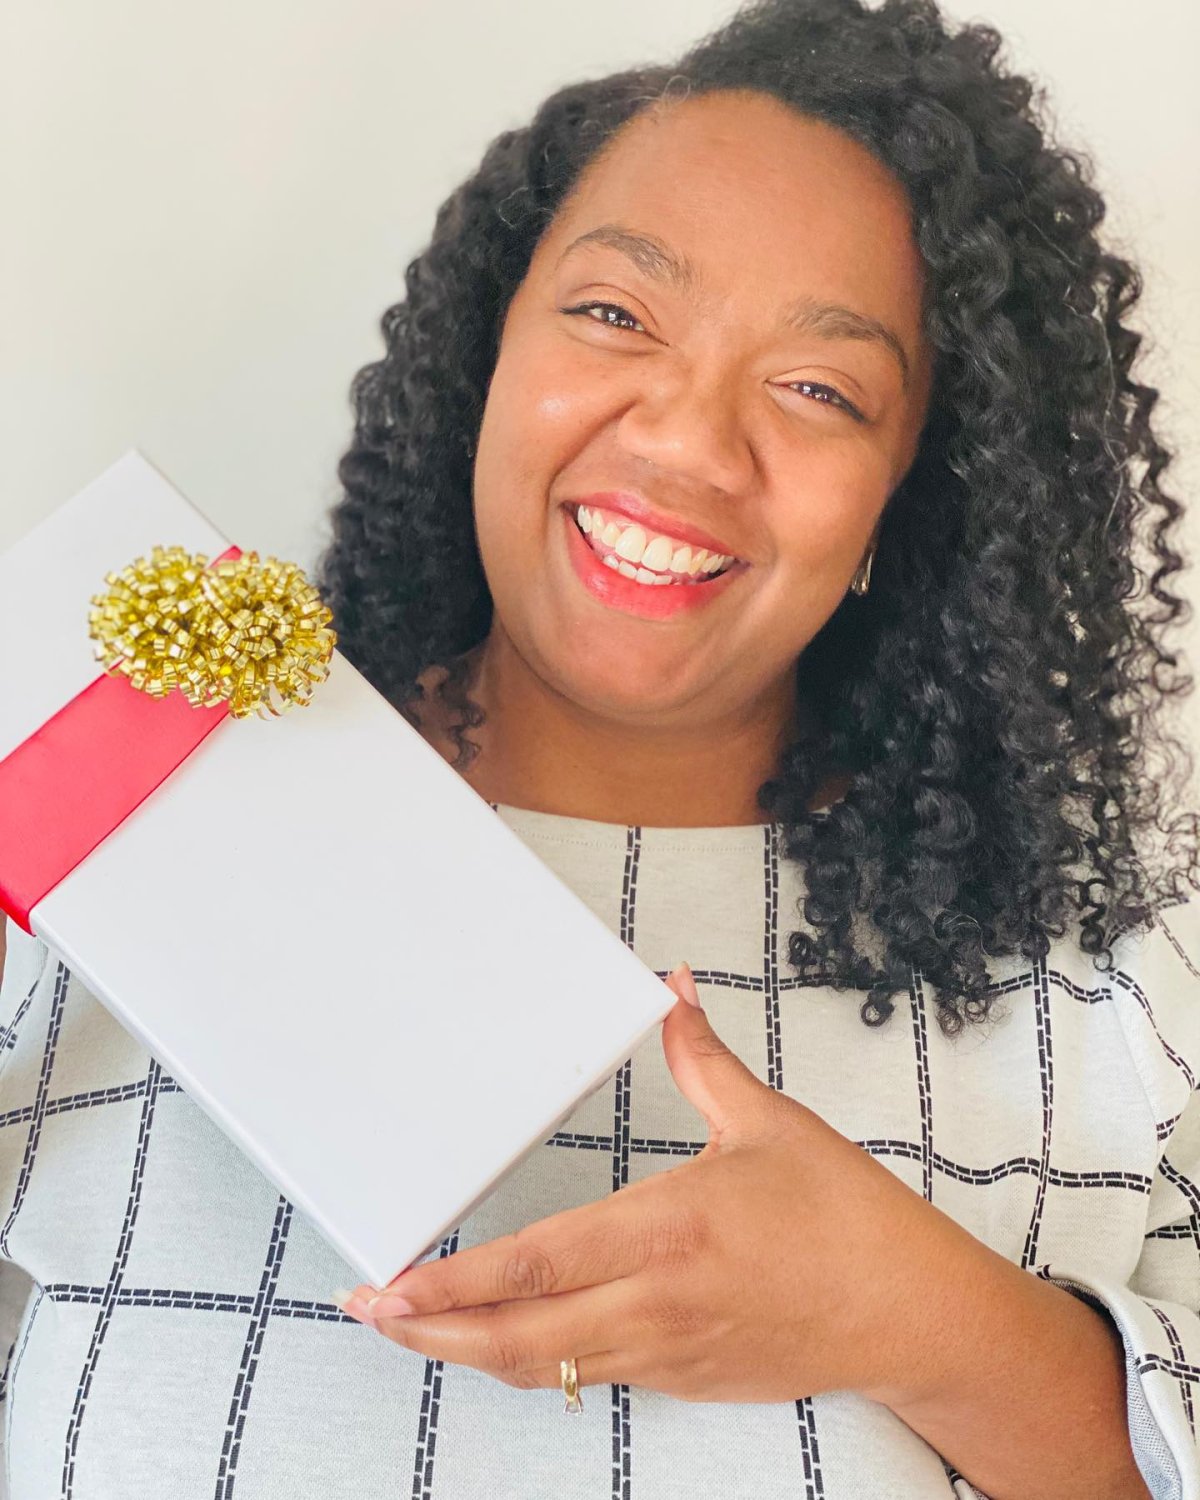 Natural Butter Bar Cosmetics owner Tiffani Young poses with a gift box of products from her business. Young is 1 of 4 women to be featured in the Global News Morning "Celebrating Black Excellence" segment airing during African Heritage Month.